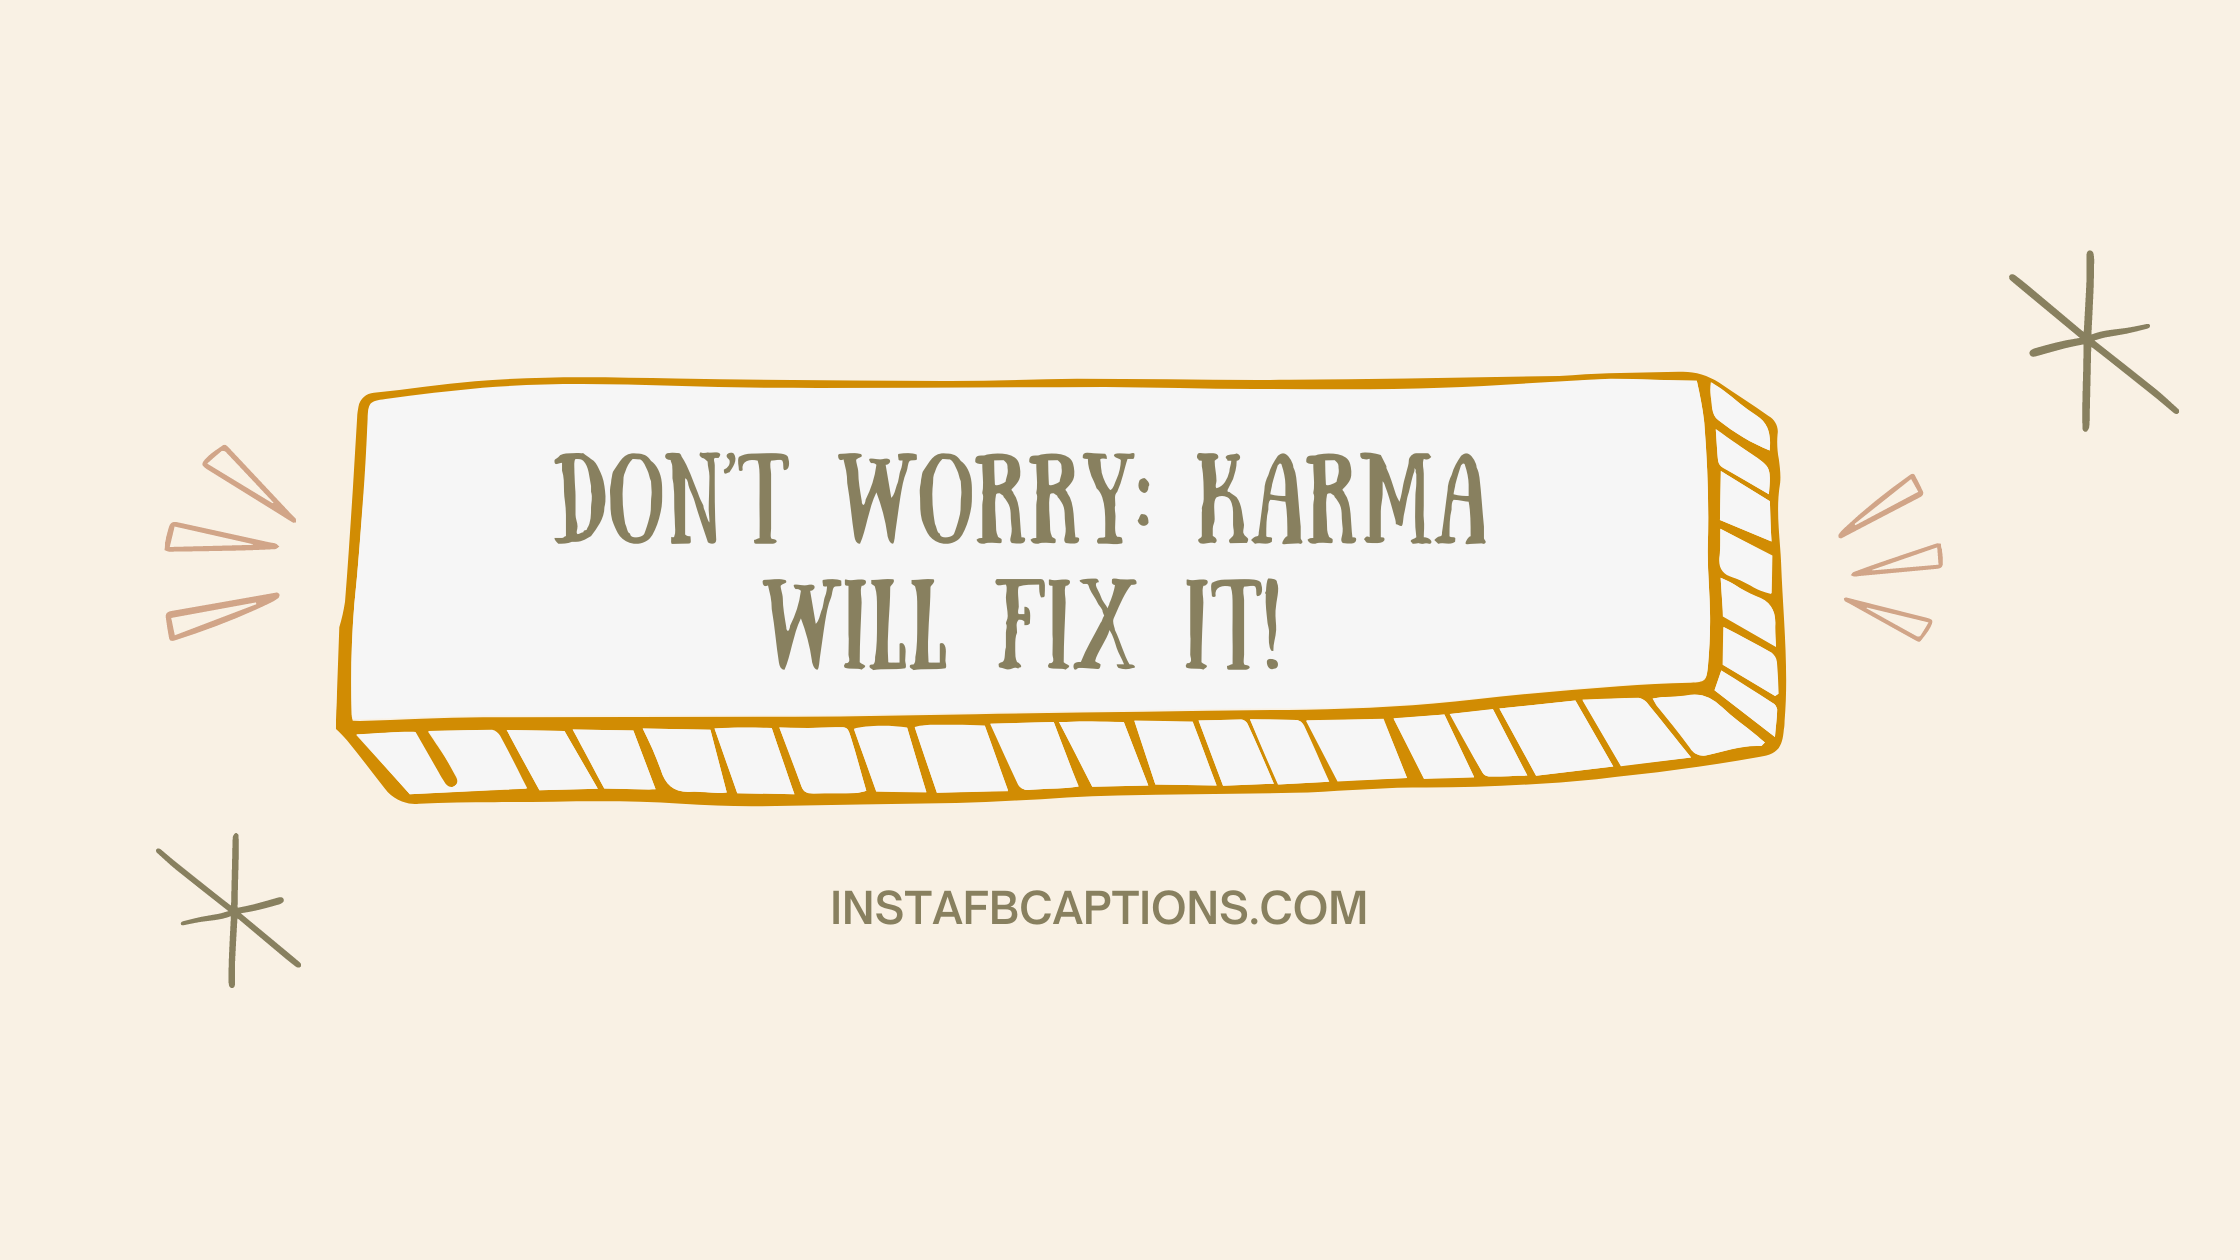 Karma Believer Quotes  - Karma Believer Quotes  - 102 KARMA Instagram Captions Quotes Hashtags in 2022